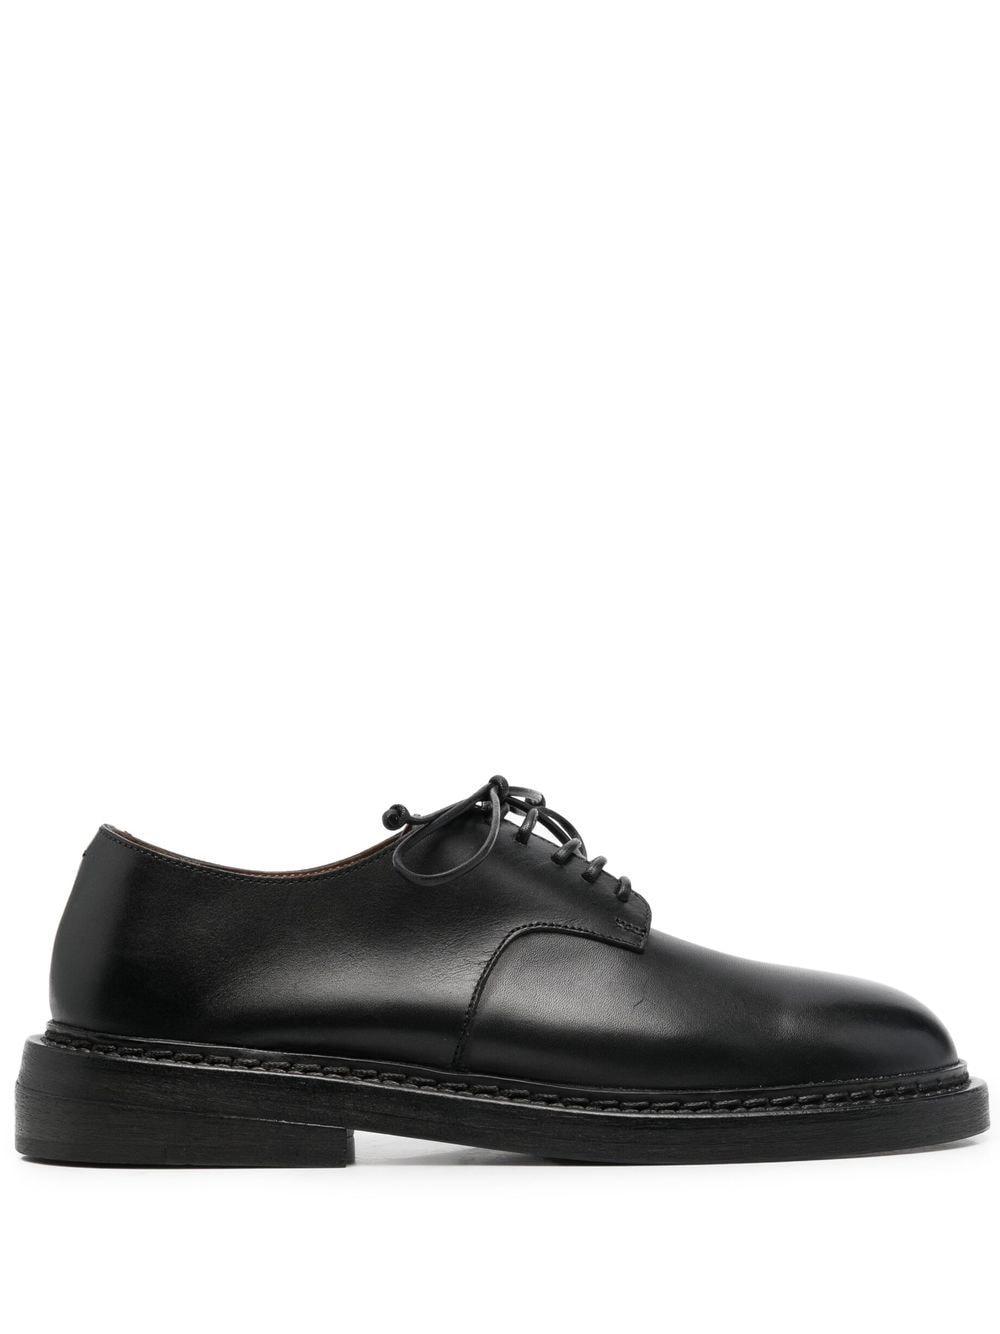 Marsèll Leather Nasello Derby 35mm Shoes in Black | Lyst Canada